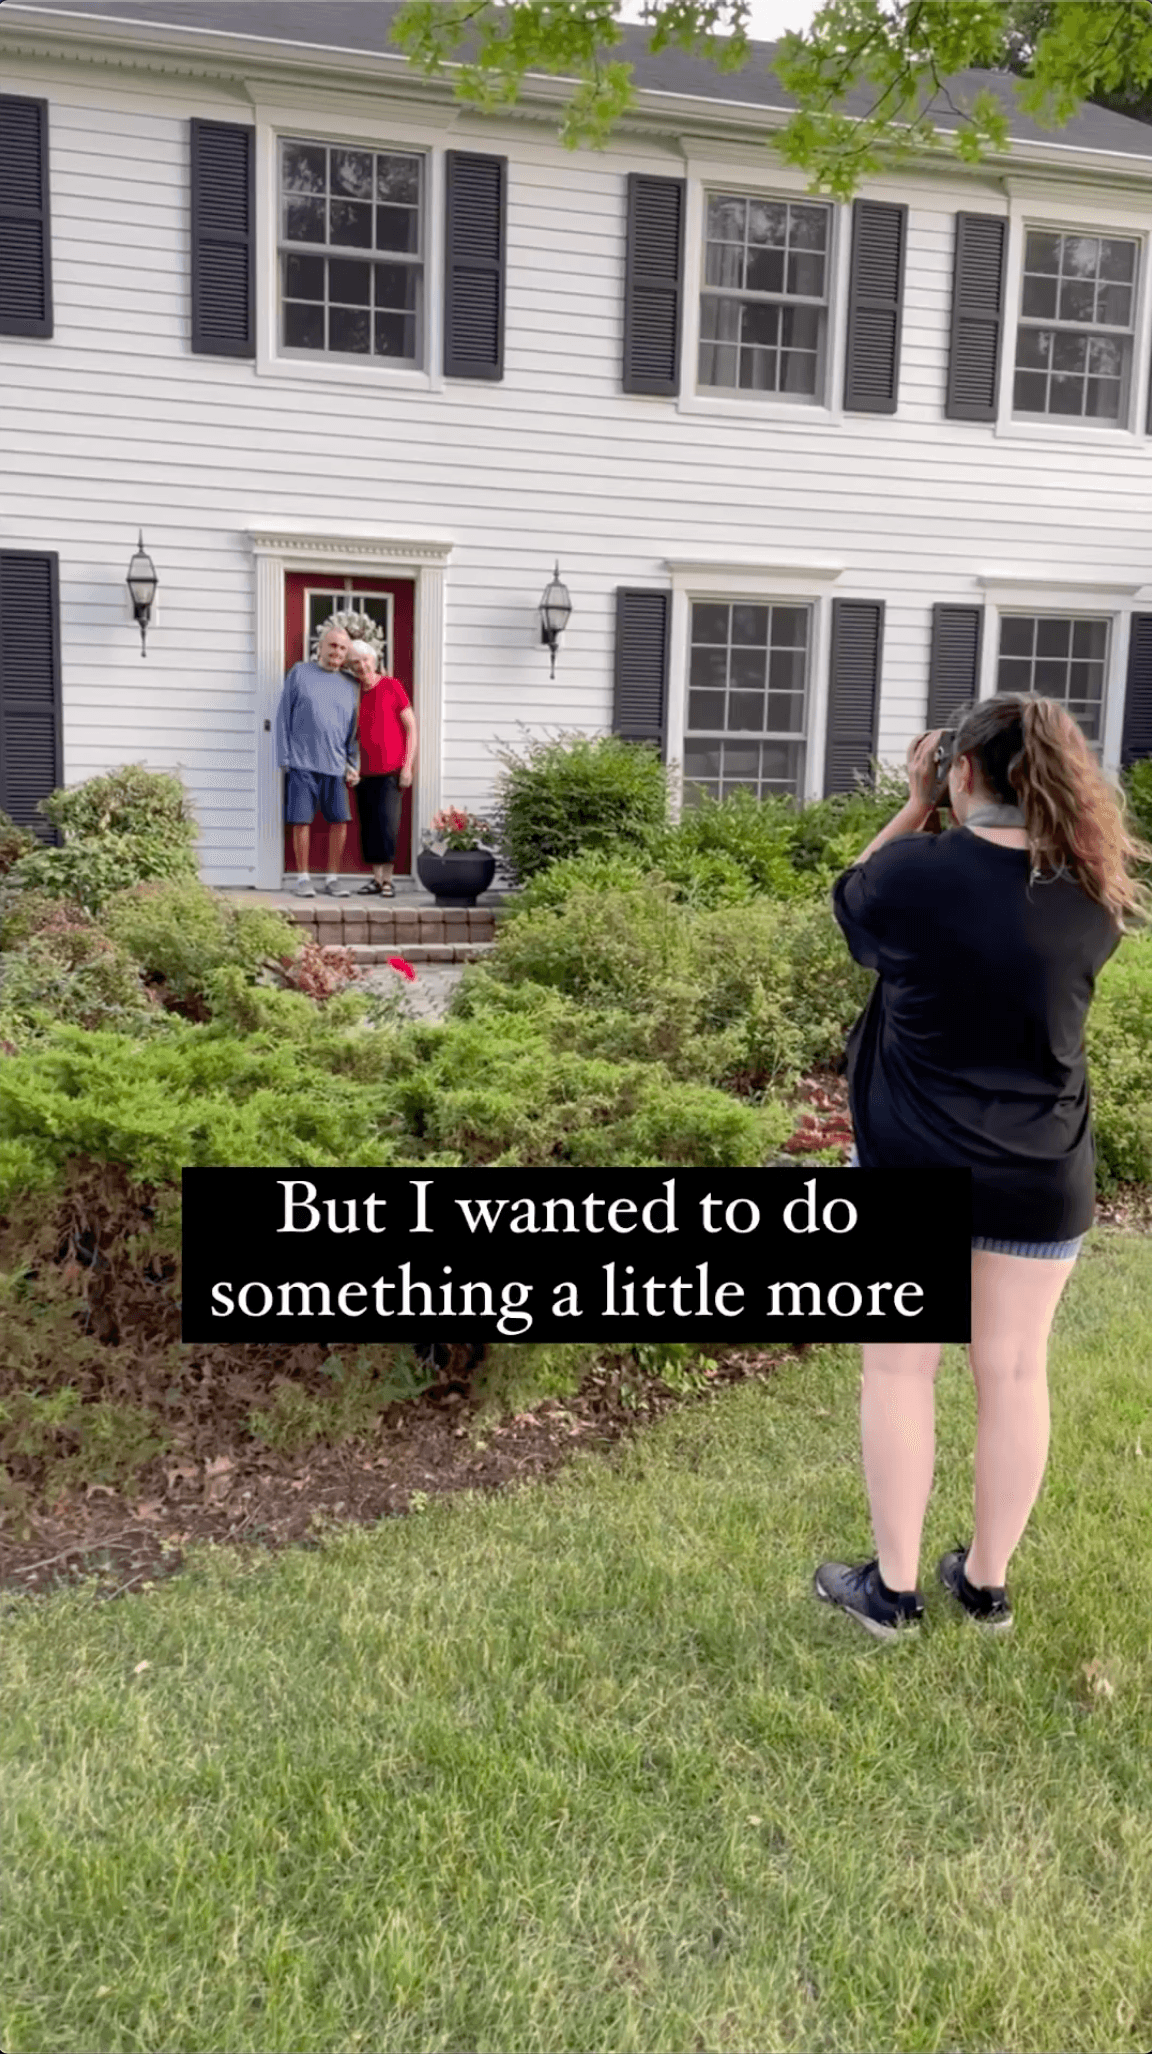 Maree Miraglia snapping pictures of her grandparents outside their home of 45 years. (Courtesy of <a href="https://www.instagram.com/mareemiragliaphotography/">Maree Miraglia</a>)